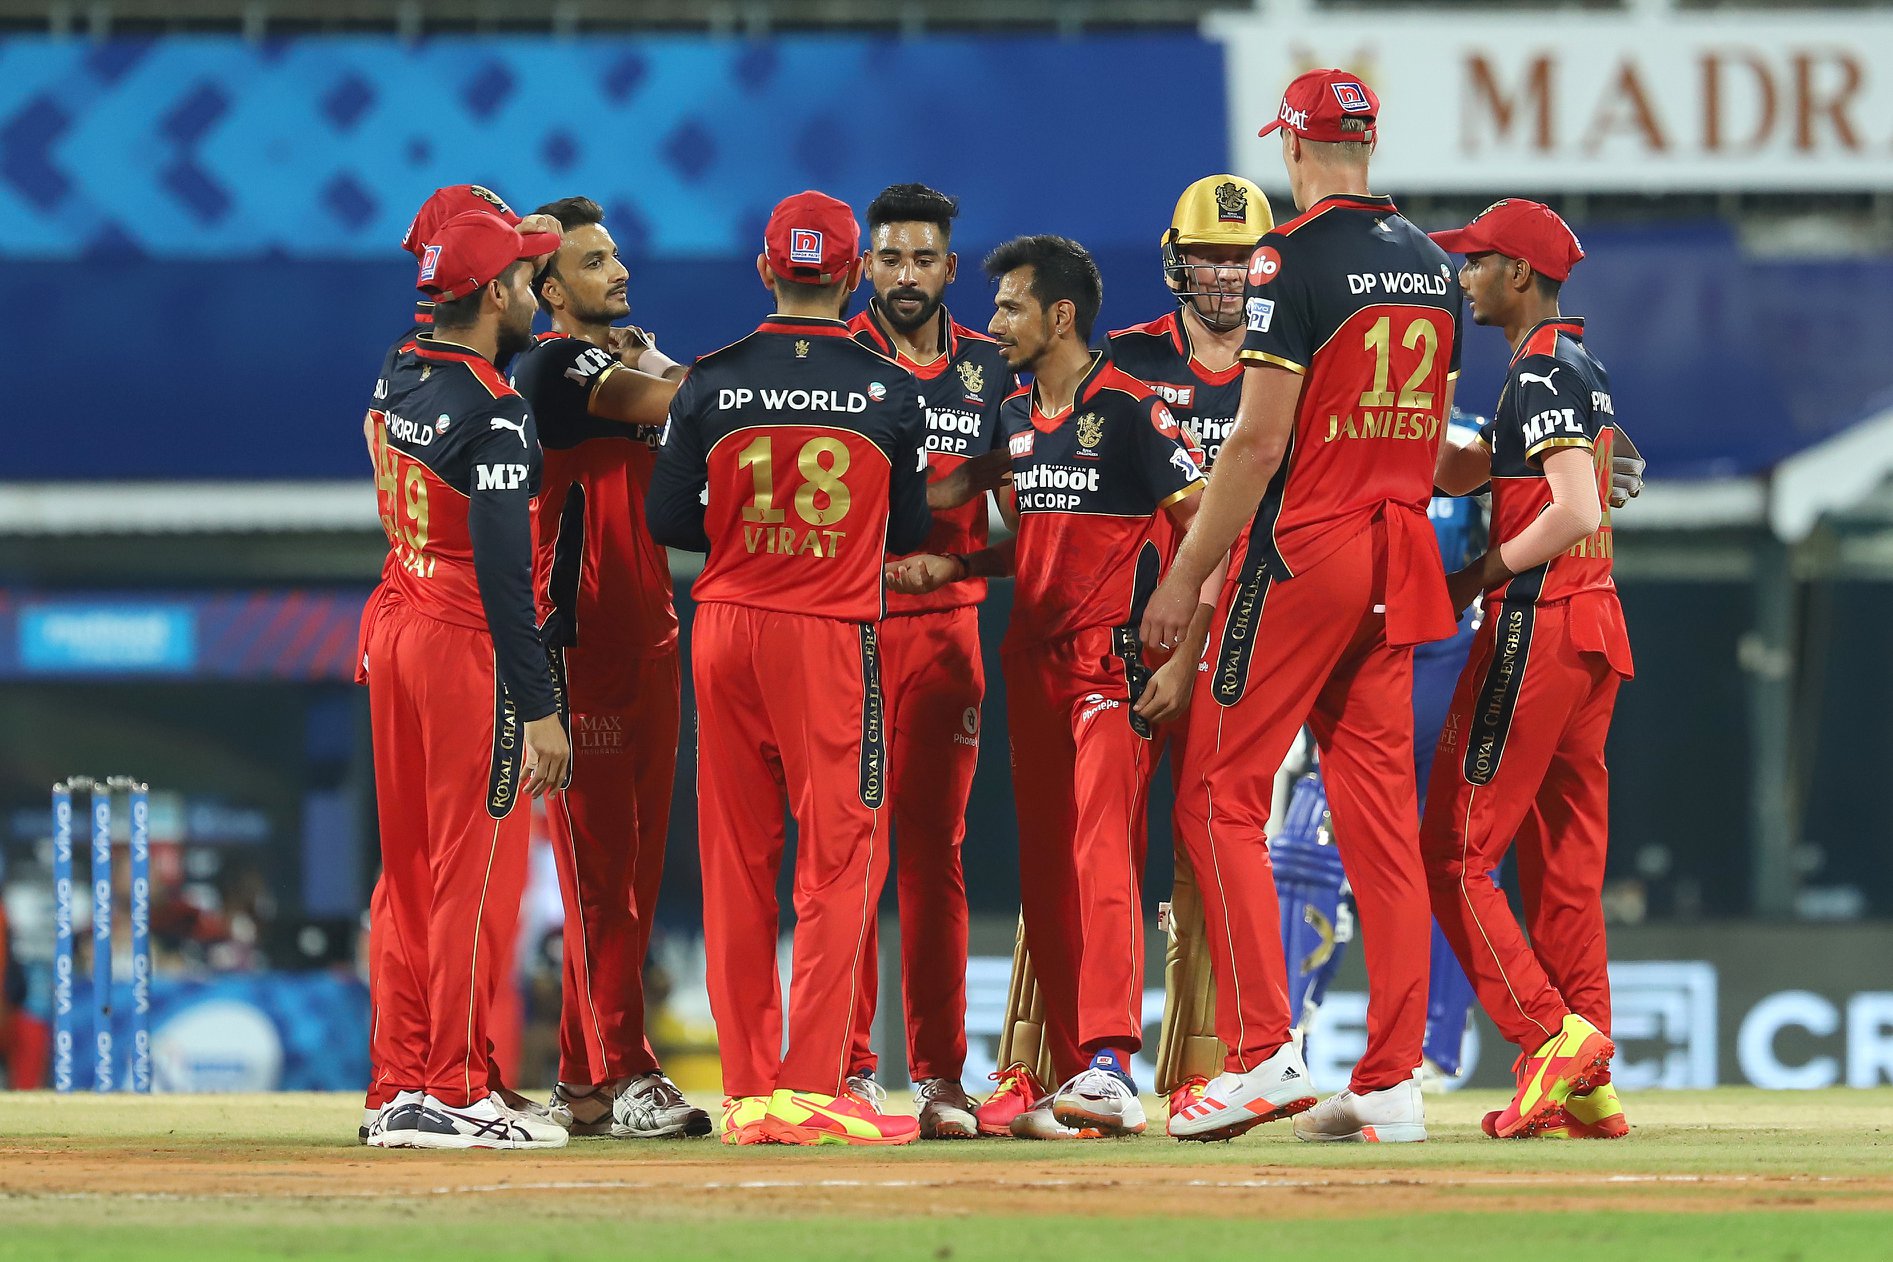 Royal Challengers Bangalore have won all 3 matches they have played so far | BCCI-IPL